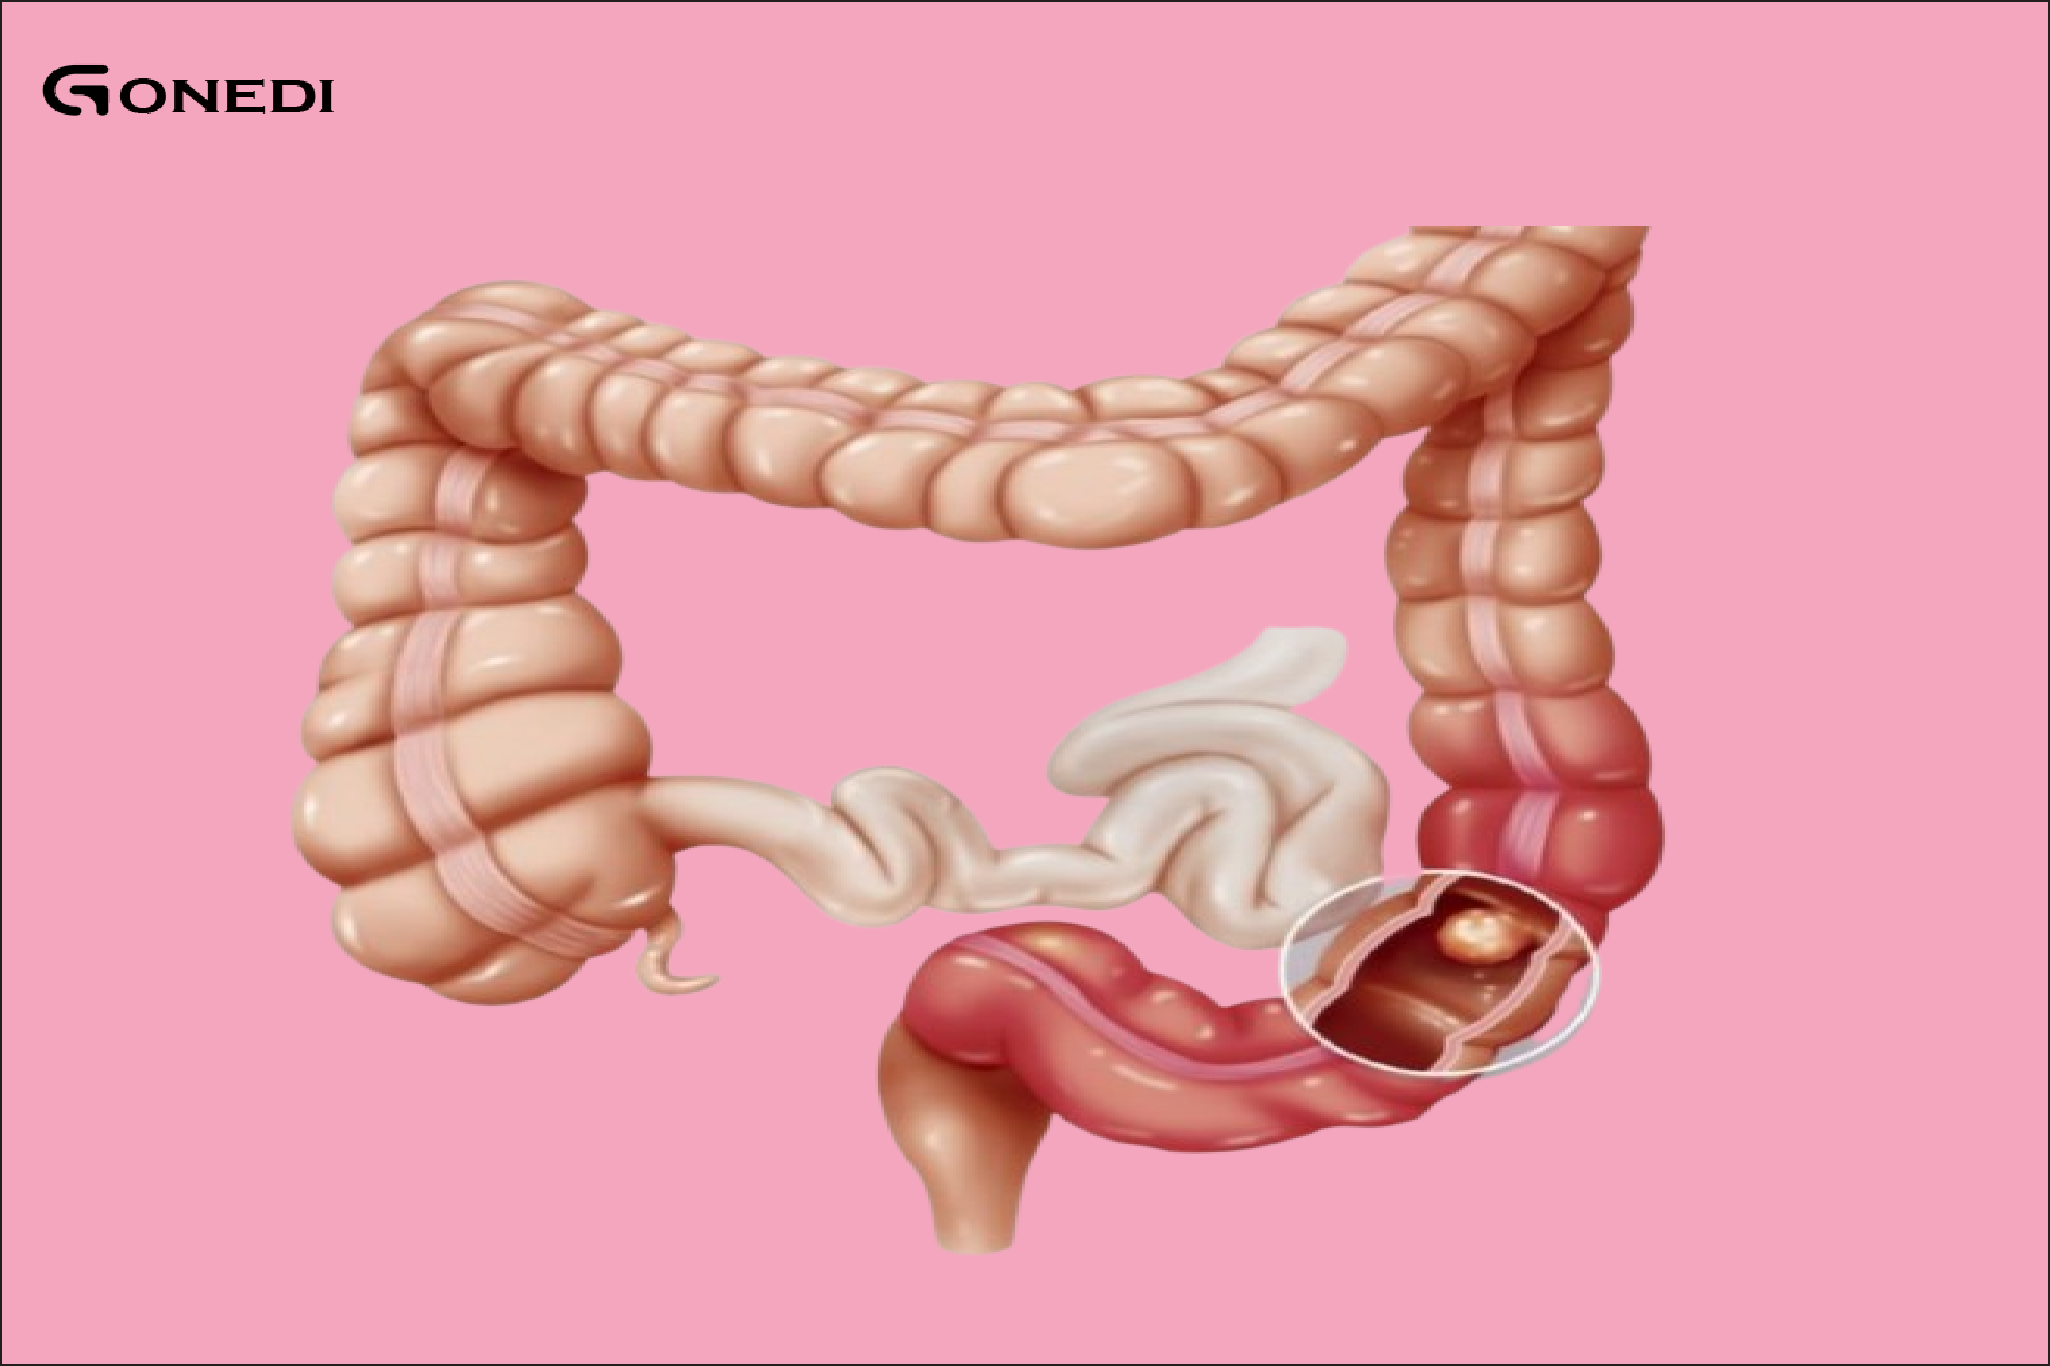 6 overlooked signs of colon cancer